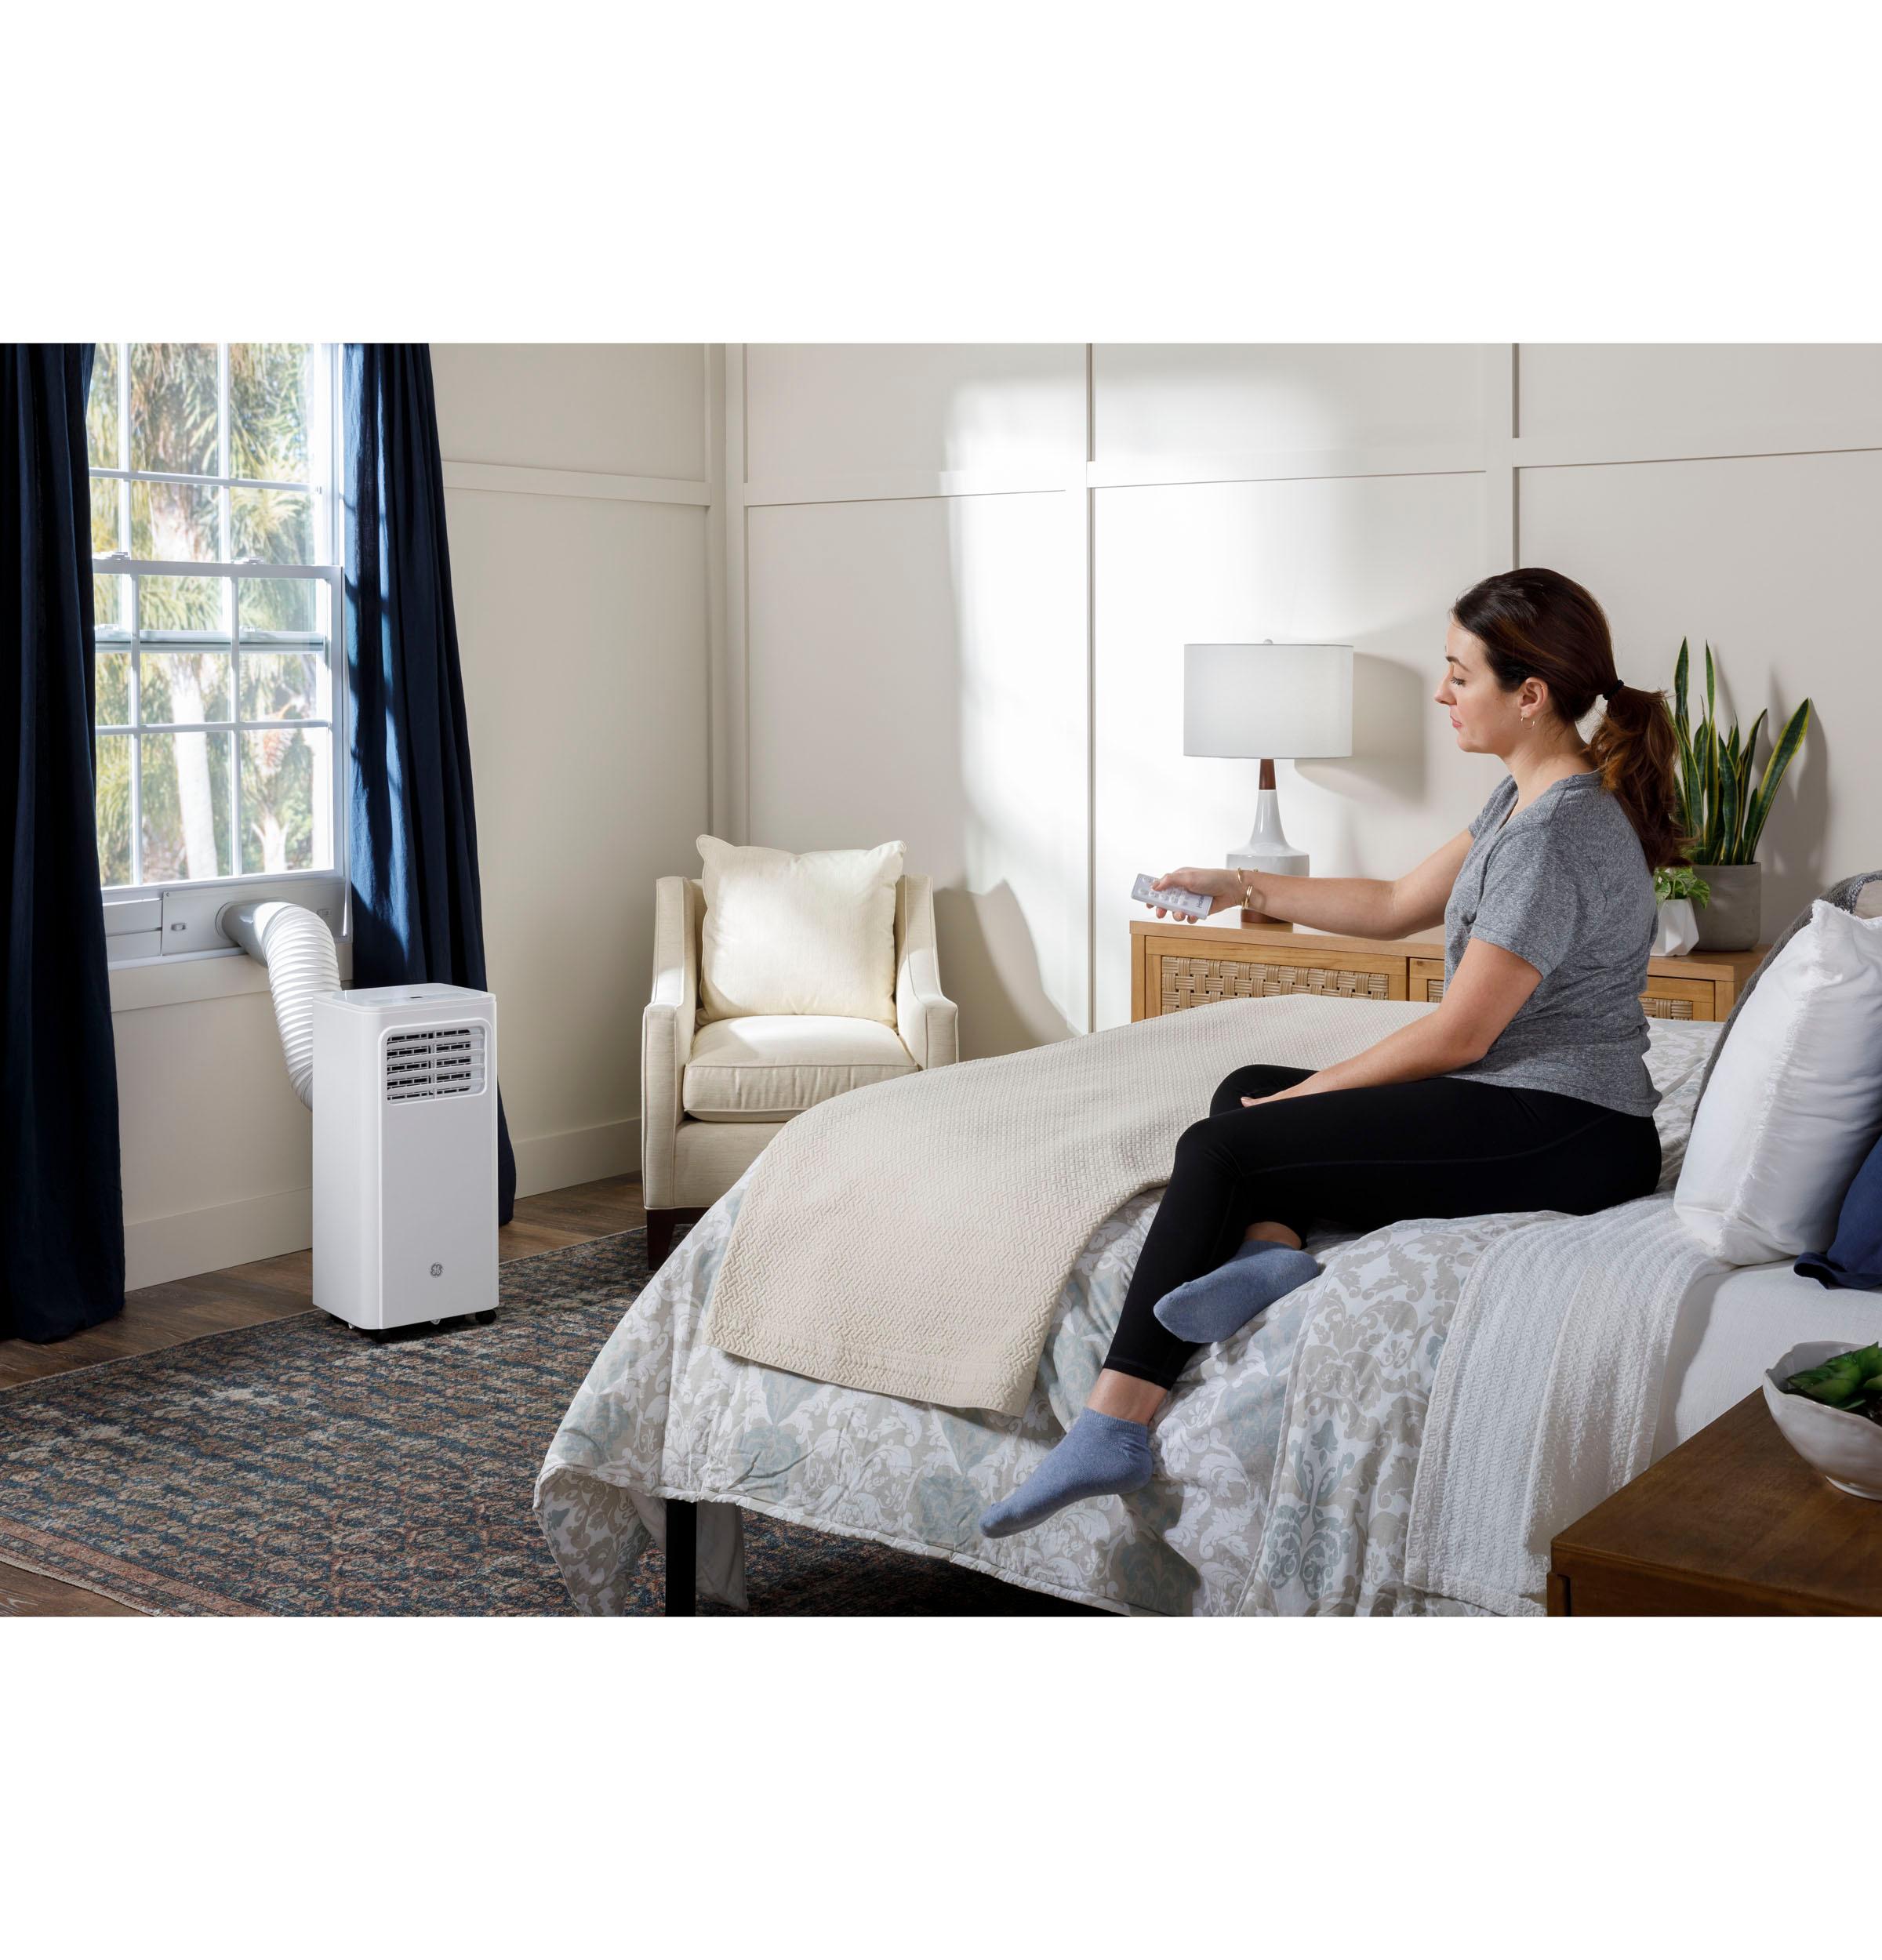 GE® 8,000 BTU Portable Air Conditioner for Small Rooms up to 150 sq ft. (5,300 BTU SACC)